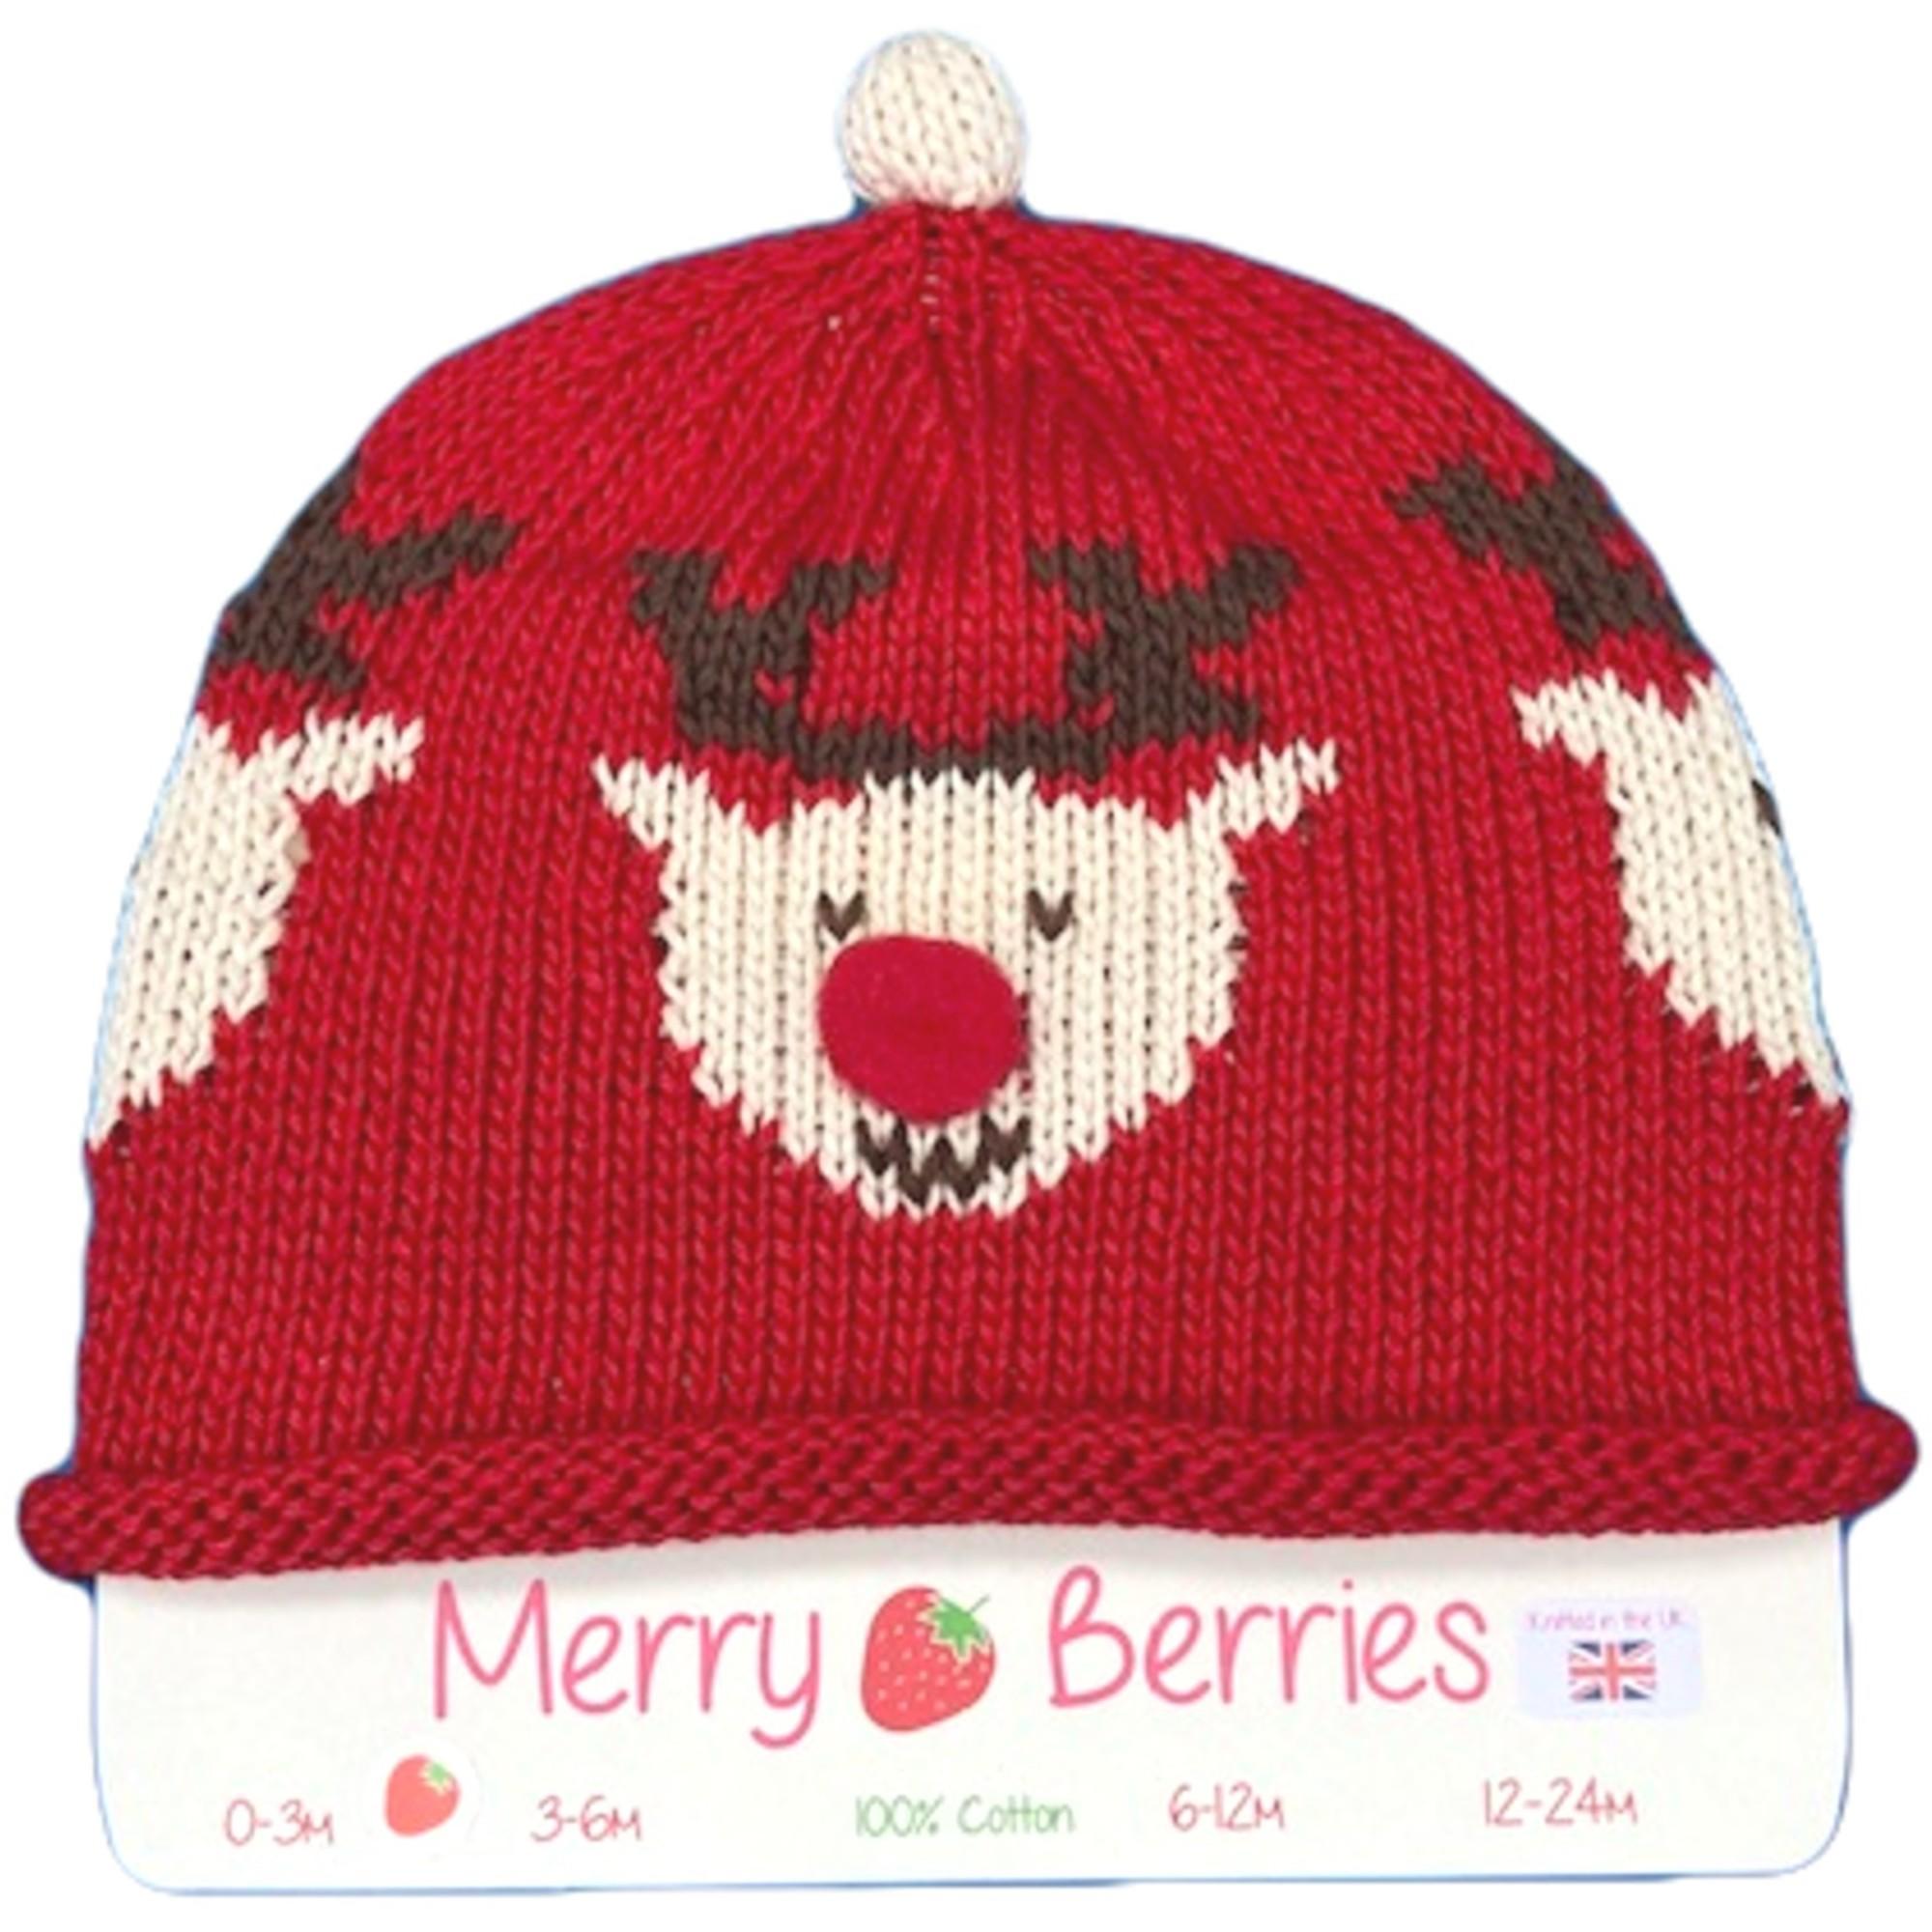 Merry Berries - Red Rudolph Knitted baby Hat-0-24mths-Cotton